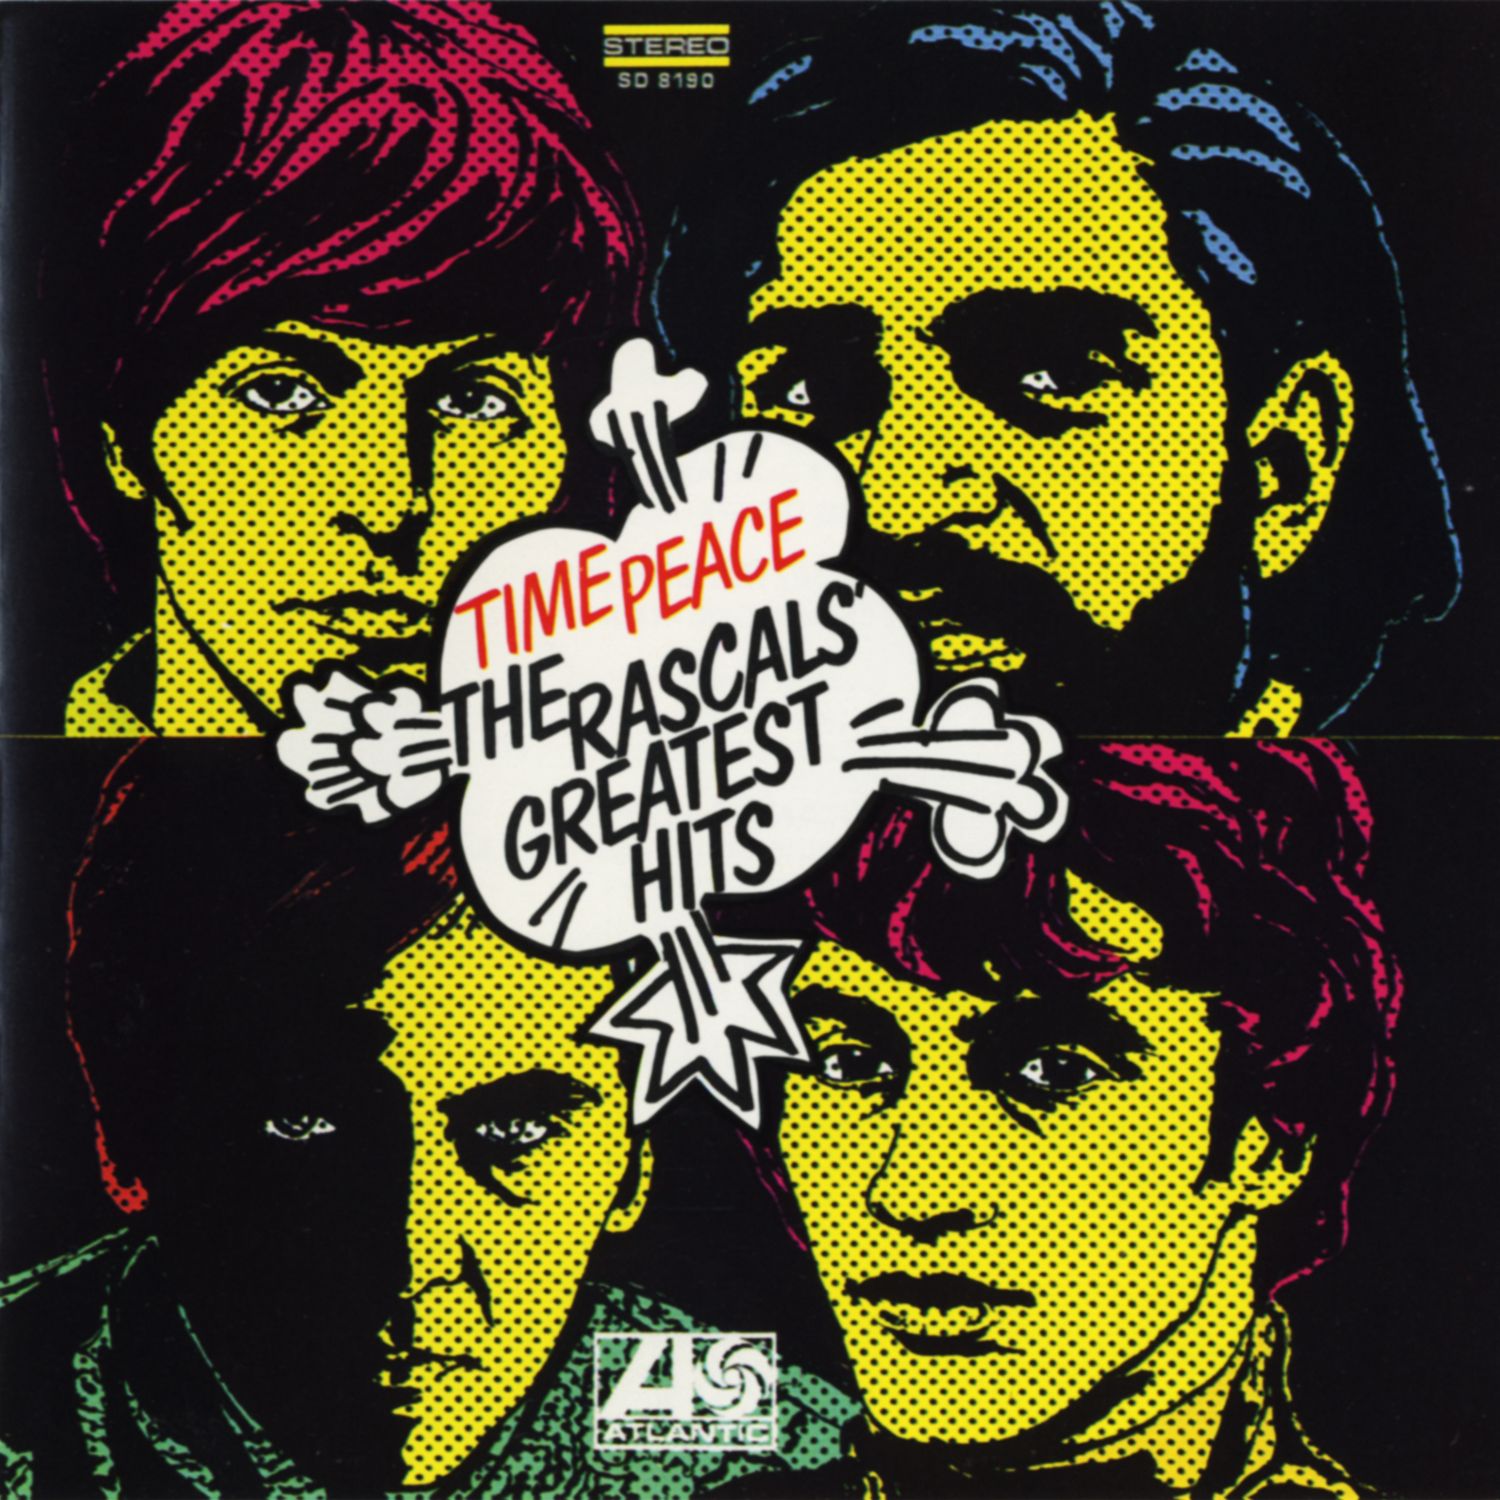 The Rascals - Time Peace: The Rascals’ Greatest Hits (1968/2014) [HDTracks FLAC 24bit/192kHz]